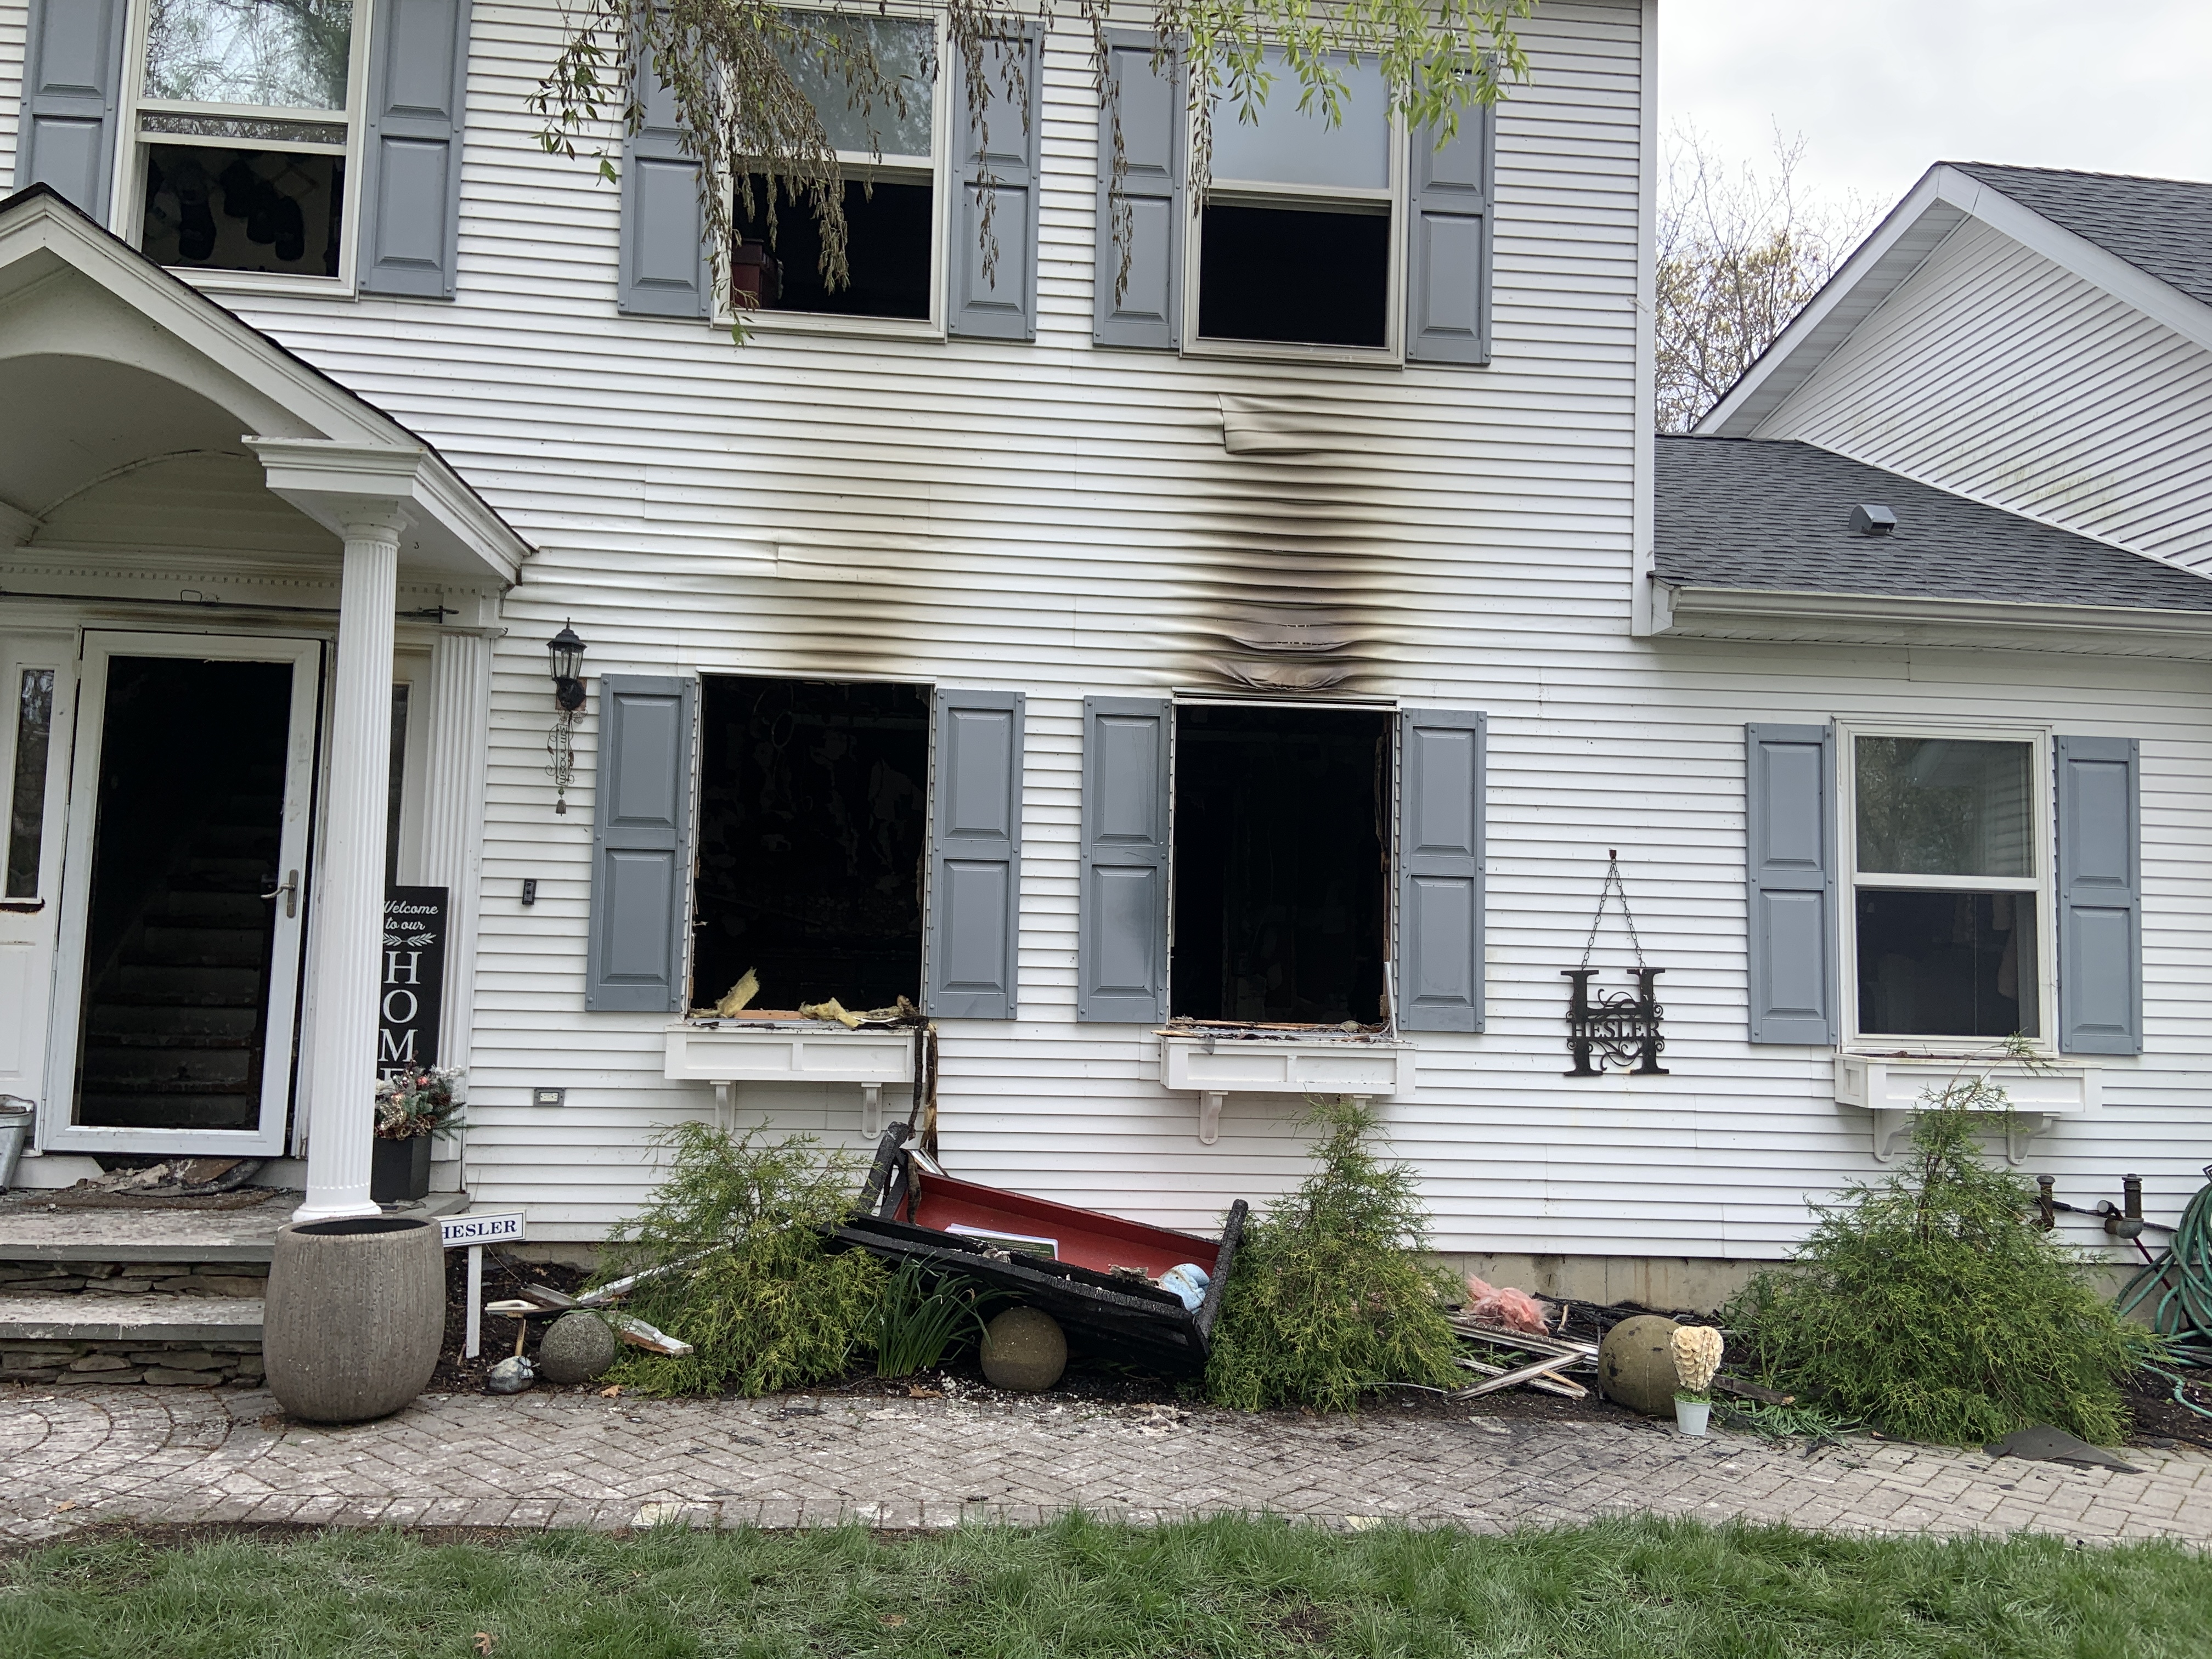 The fire apparently began in the living room of the two-story home on Carlisle Lane in Sag Harbor. STEPHEN J. KOTZ